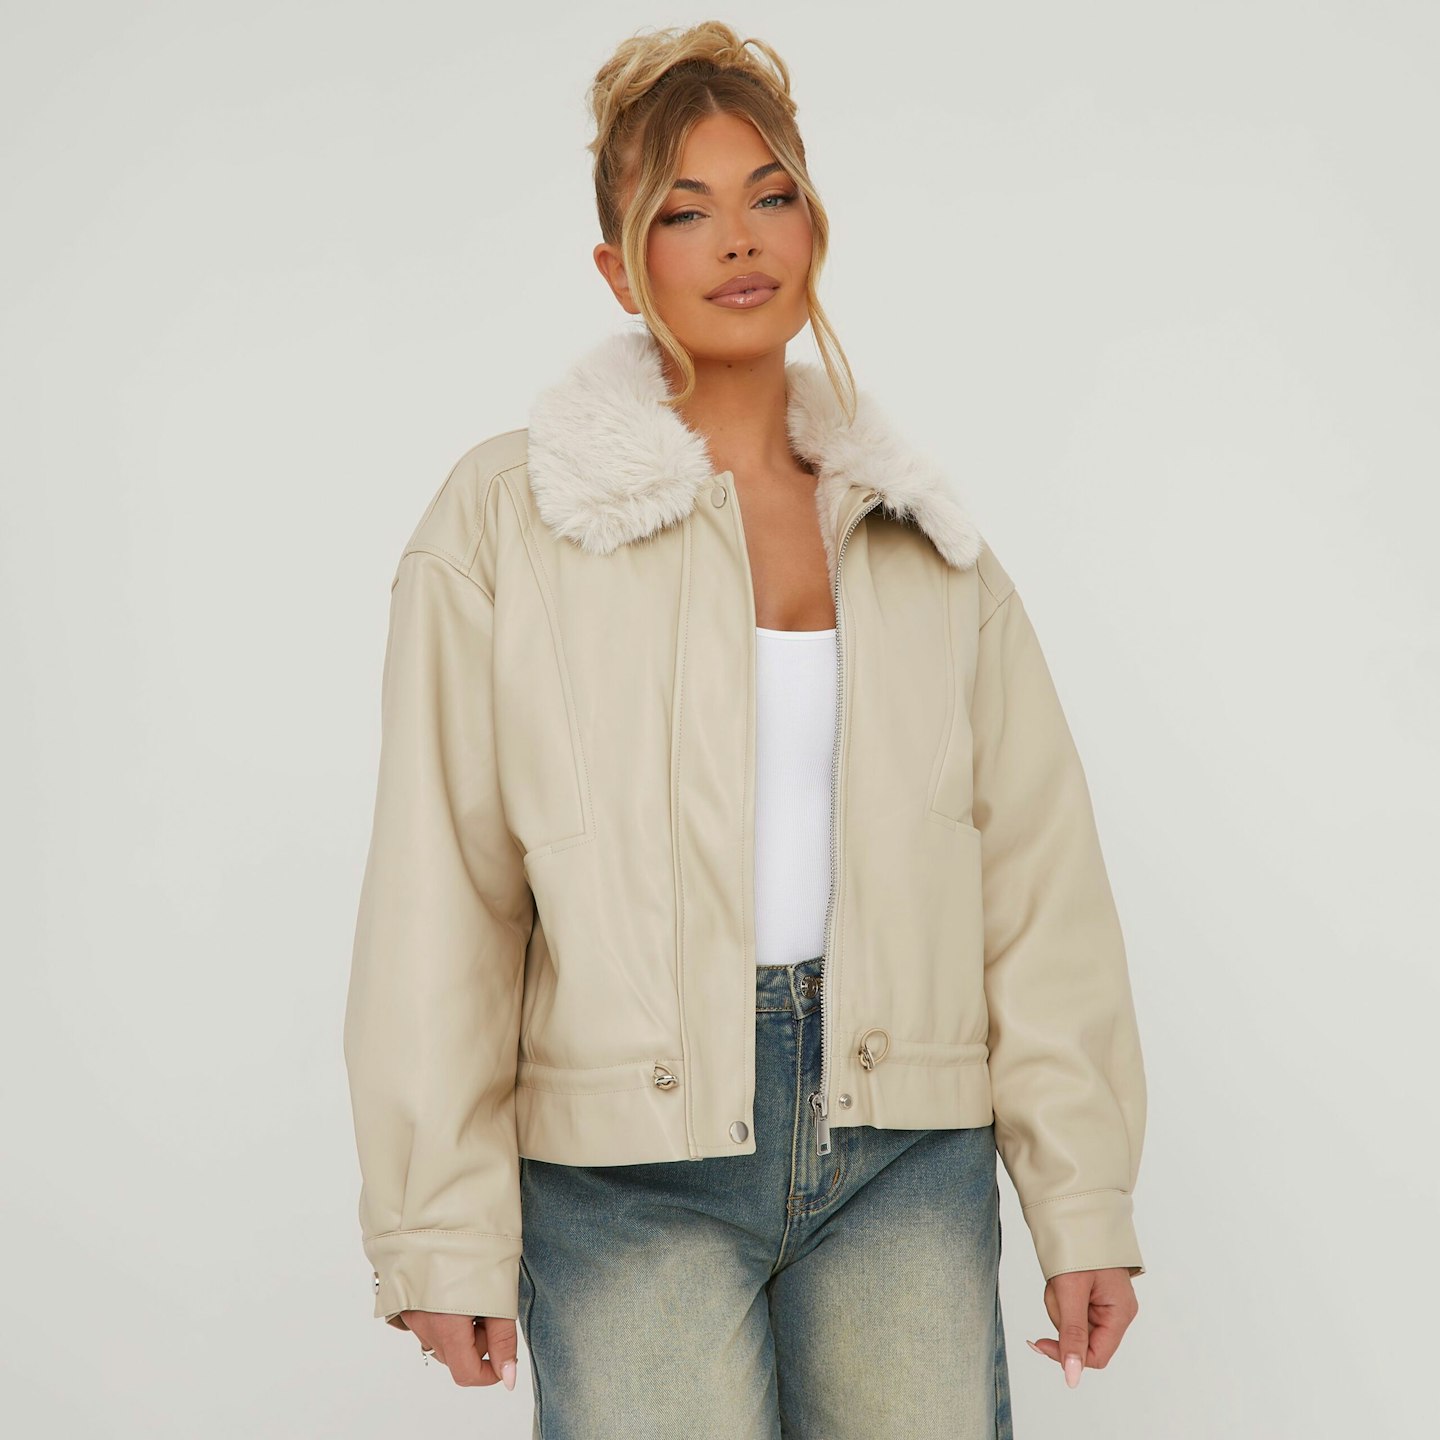 Ego Faux Fur Collar Aviator Jacket in Cream Faux Leather